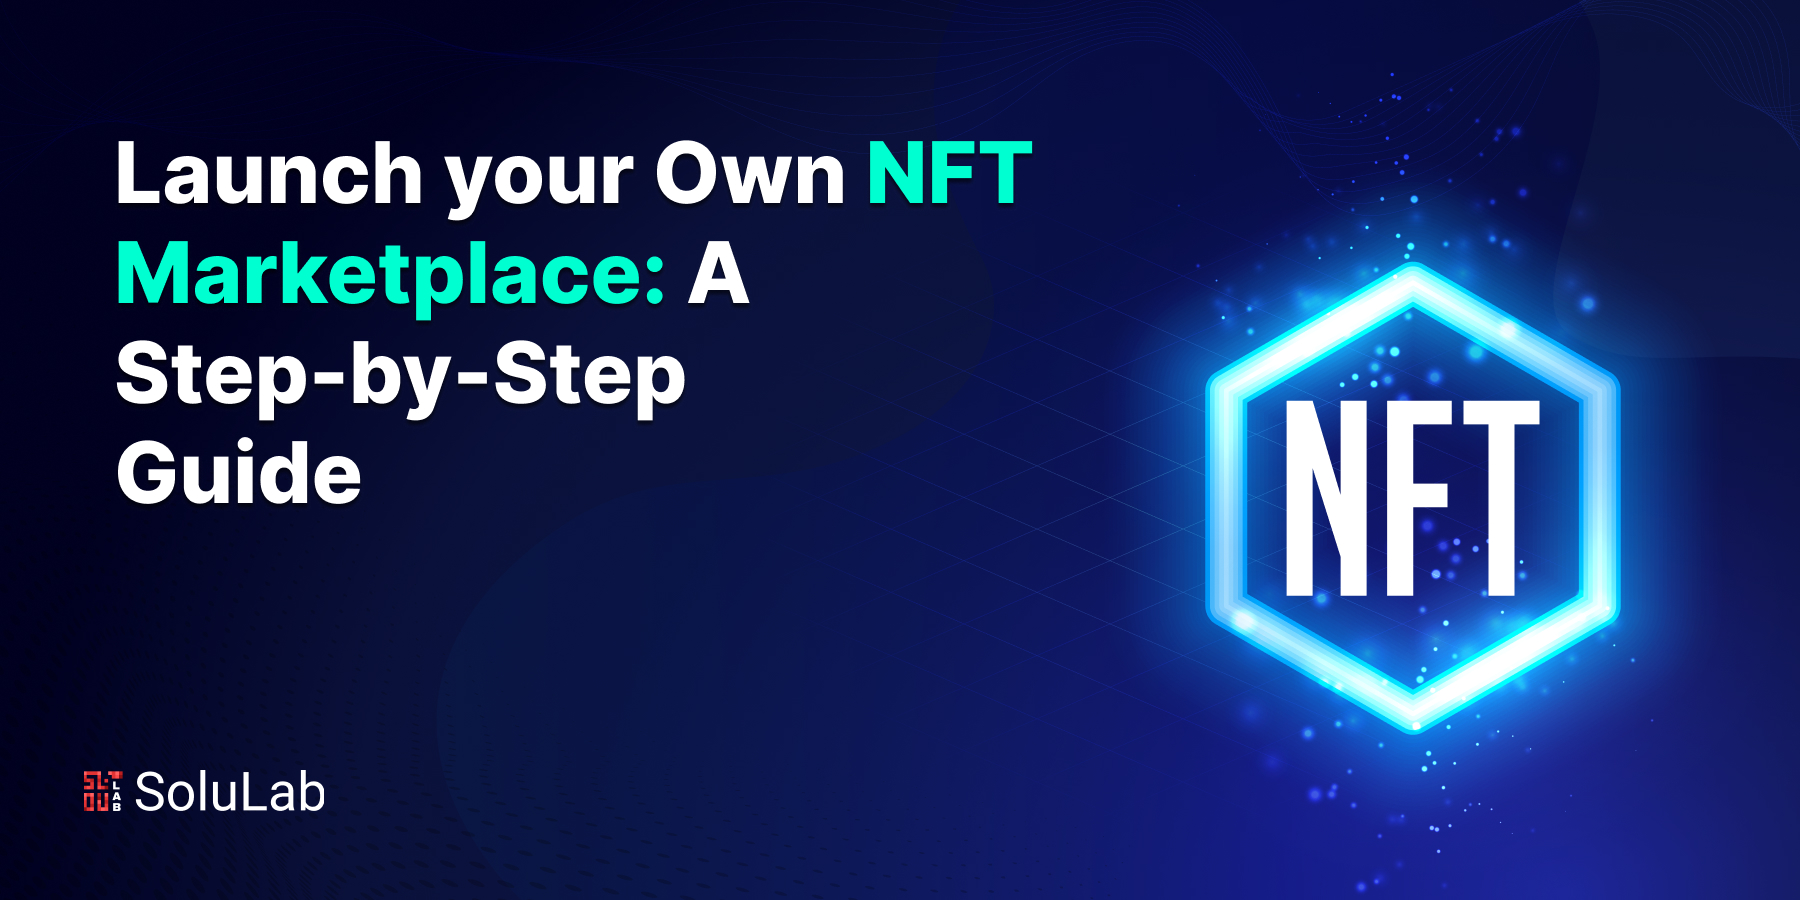 Launch your Own NFT Marketplace: A Step-by-Step Guide